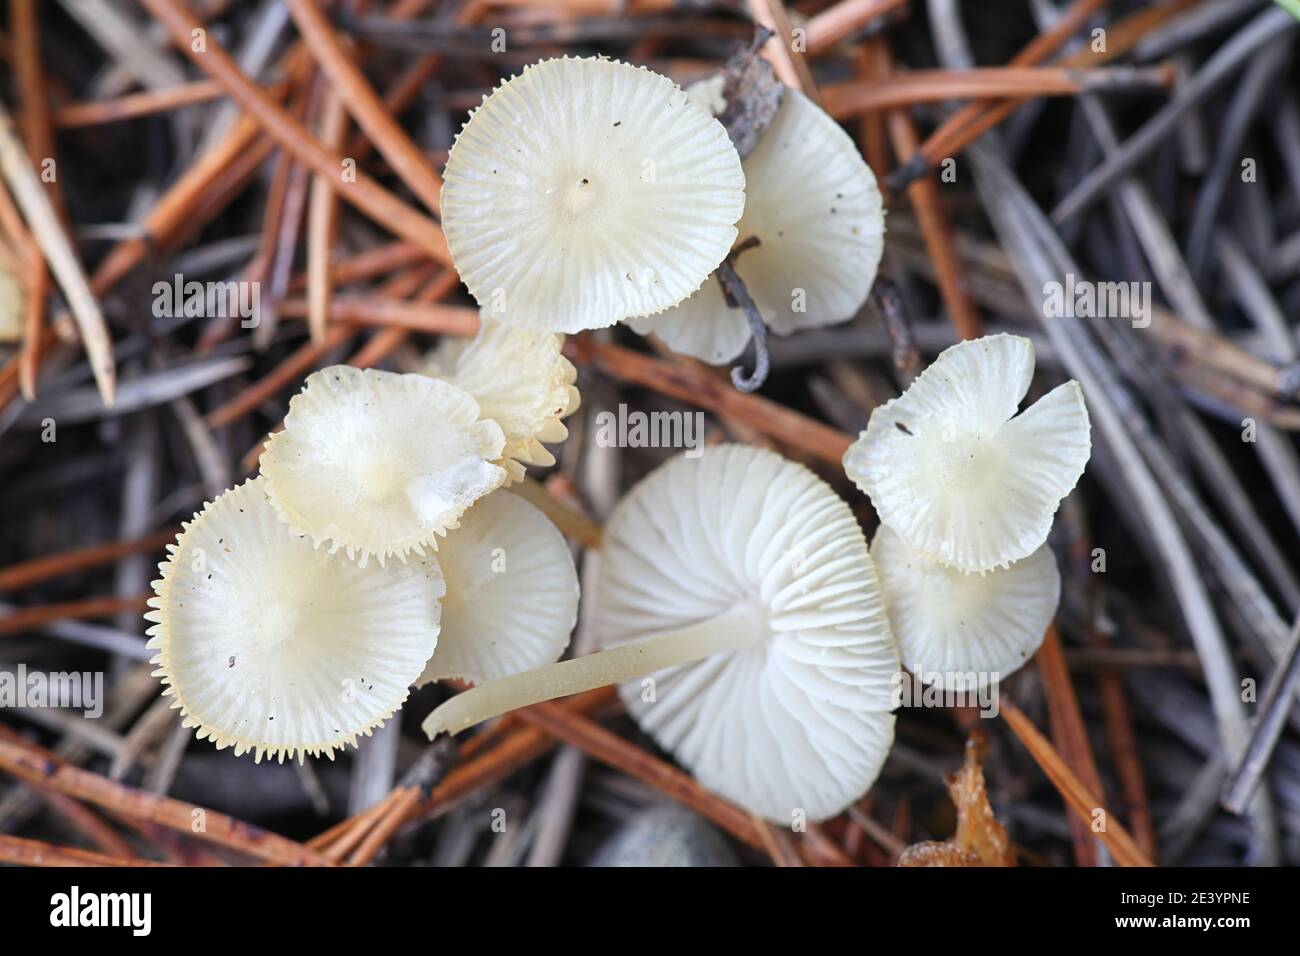 Mycena flavoalba, also called Atheniella flavoalba, commonly known as the ivory bonnet, wild mushroom from Finland Stock Photo